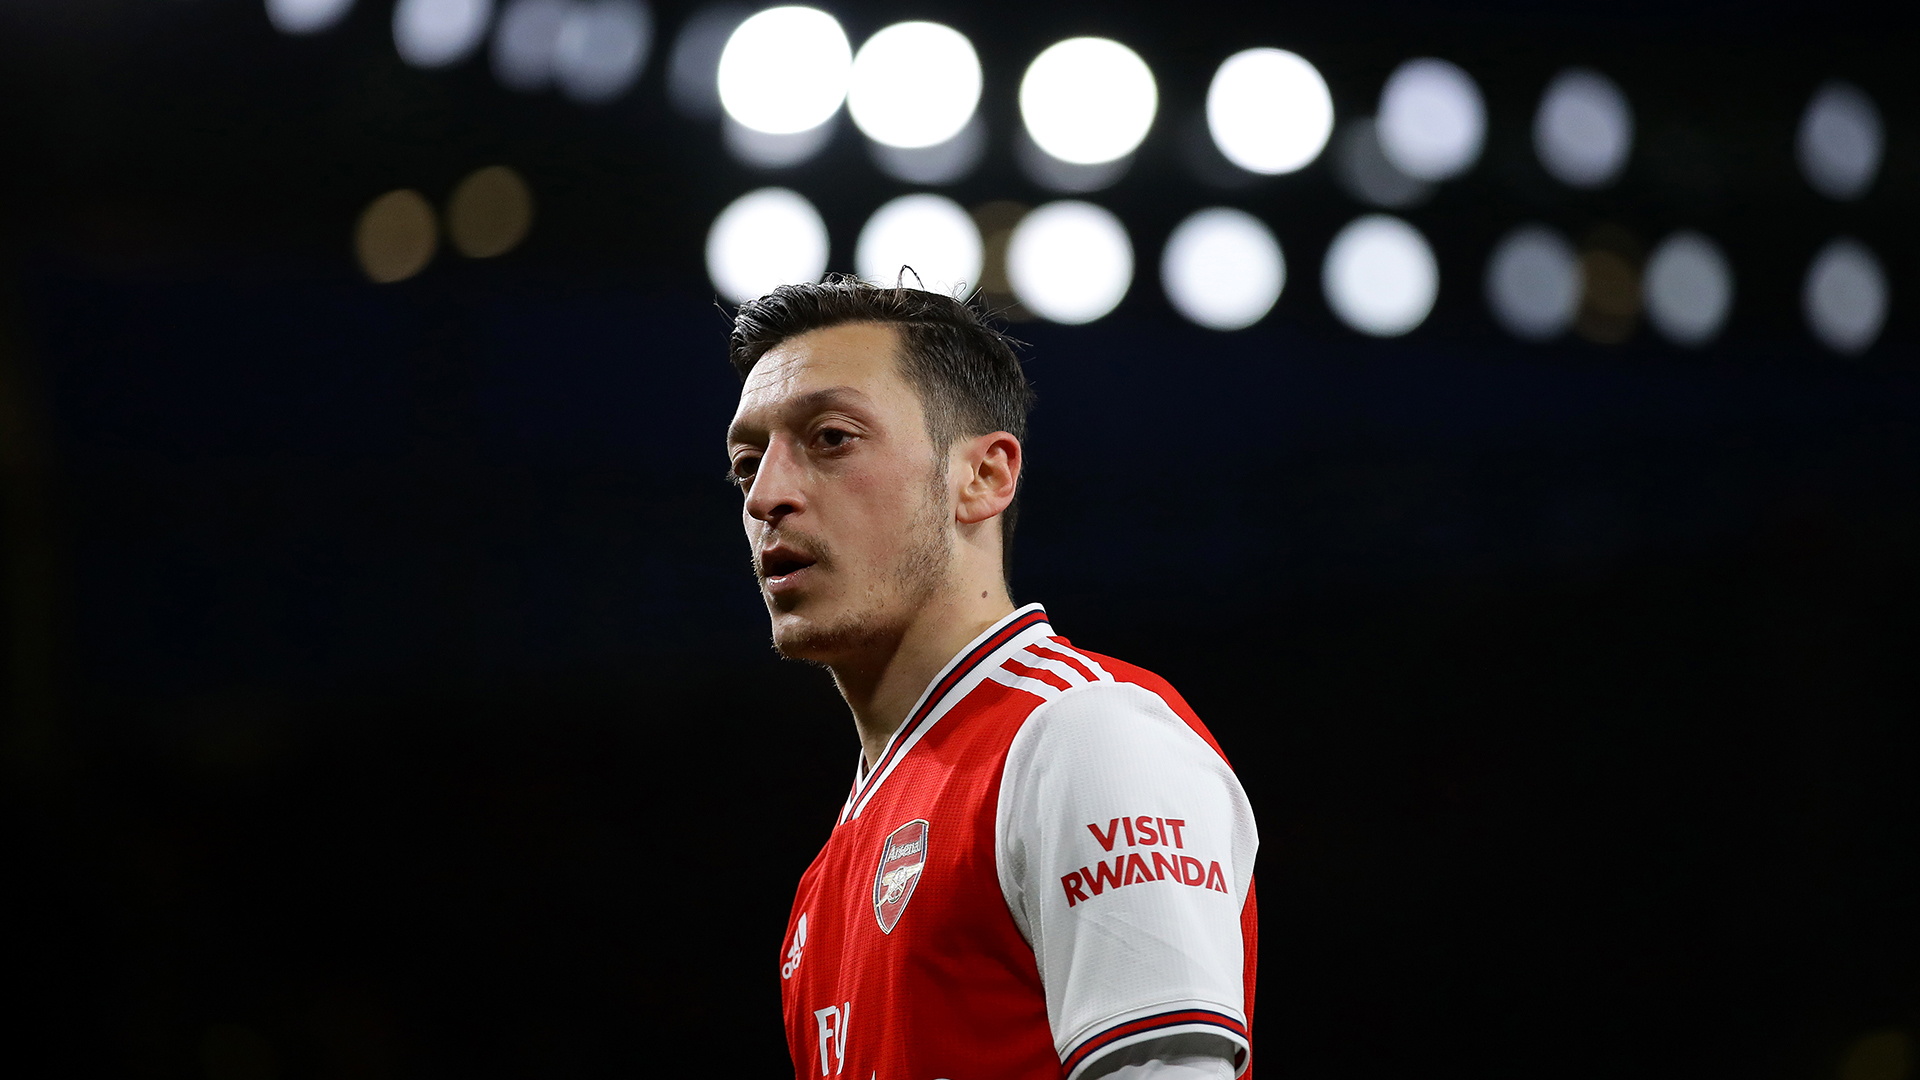 'Not a good guy in the dressing room' - Arsenal legend Brady takes aim at Gunners outcast Ozil